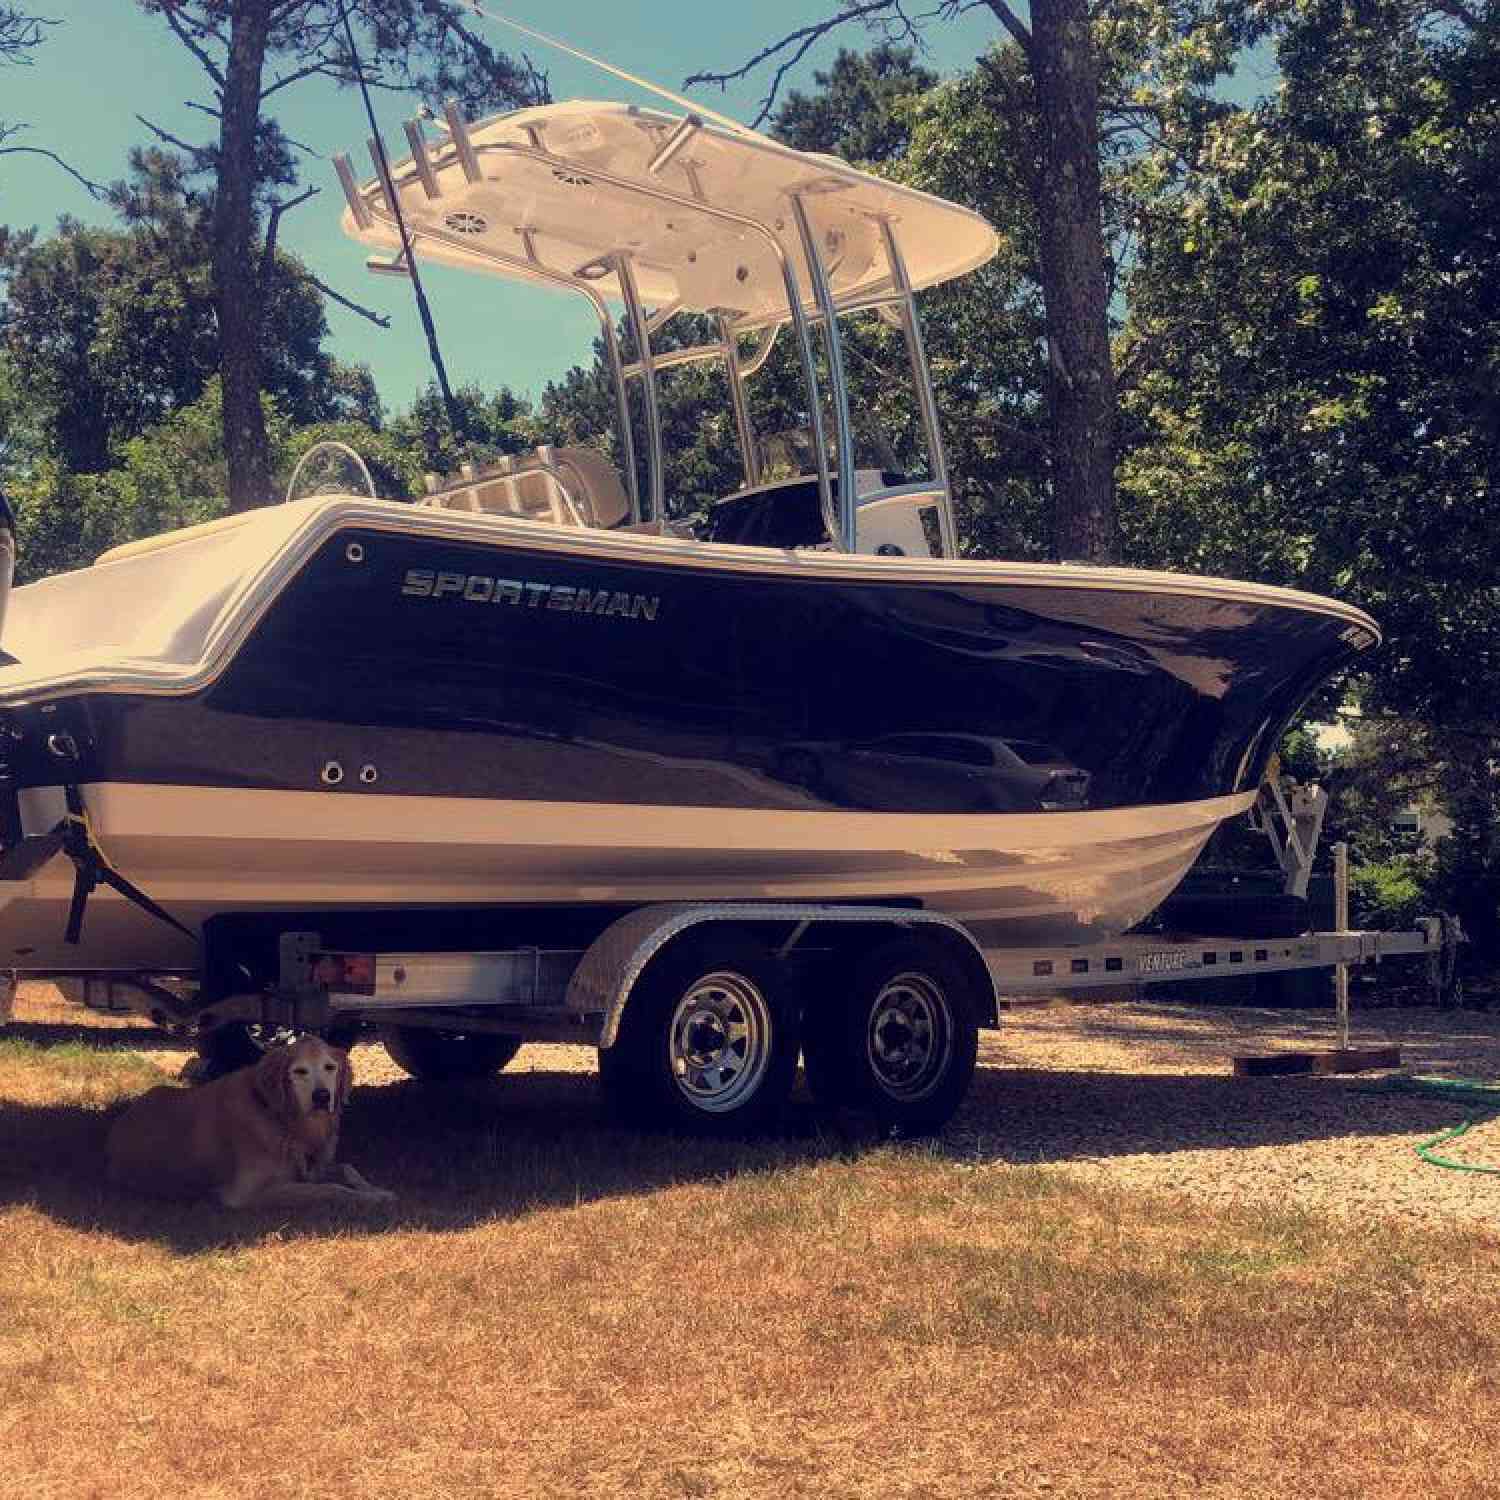 My beautiful dog resting in the shade of my beautiful boat